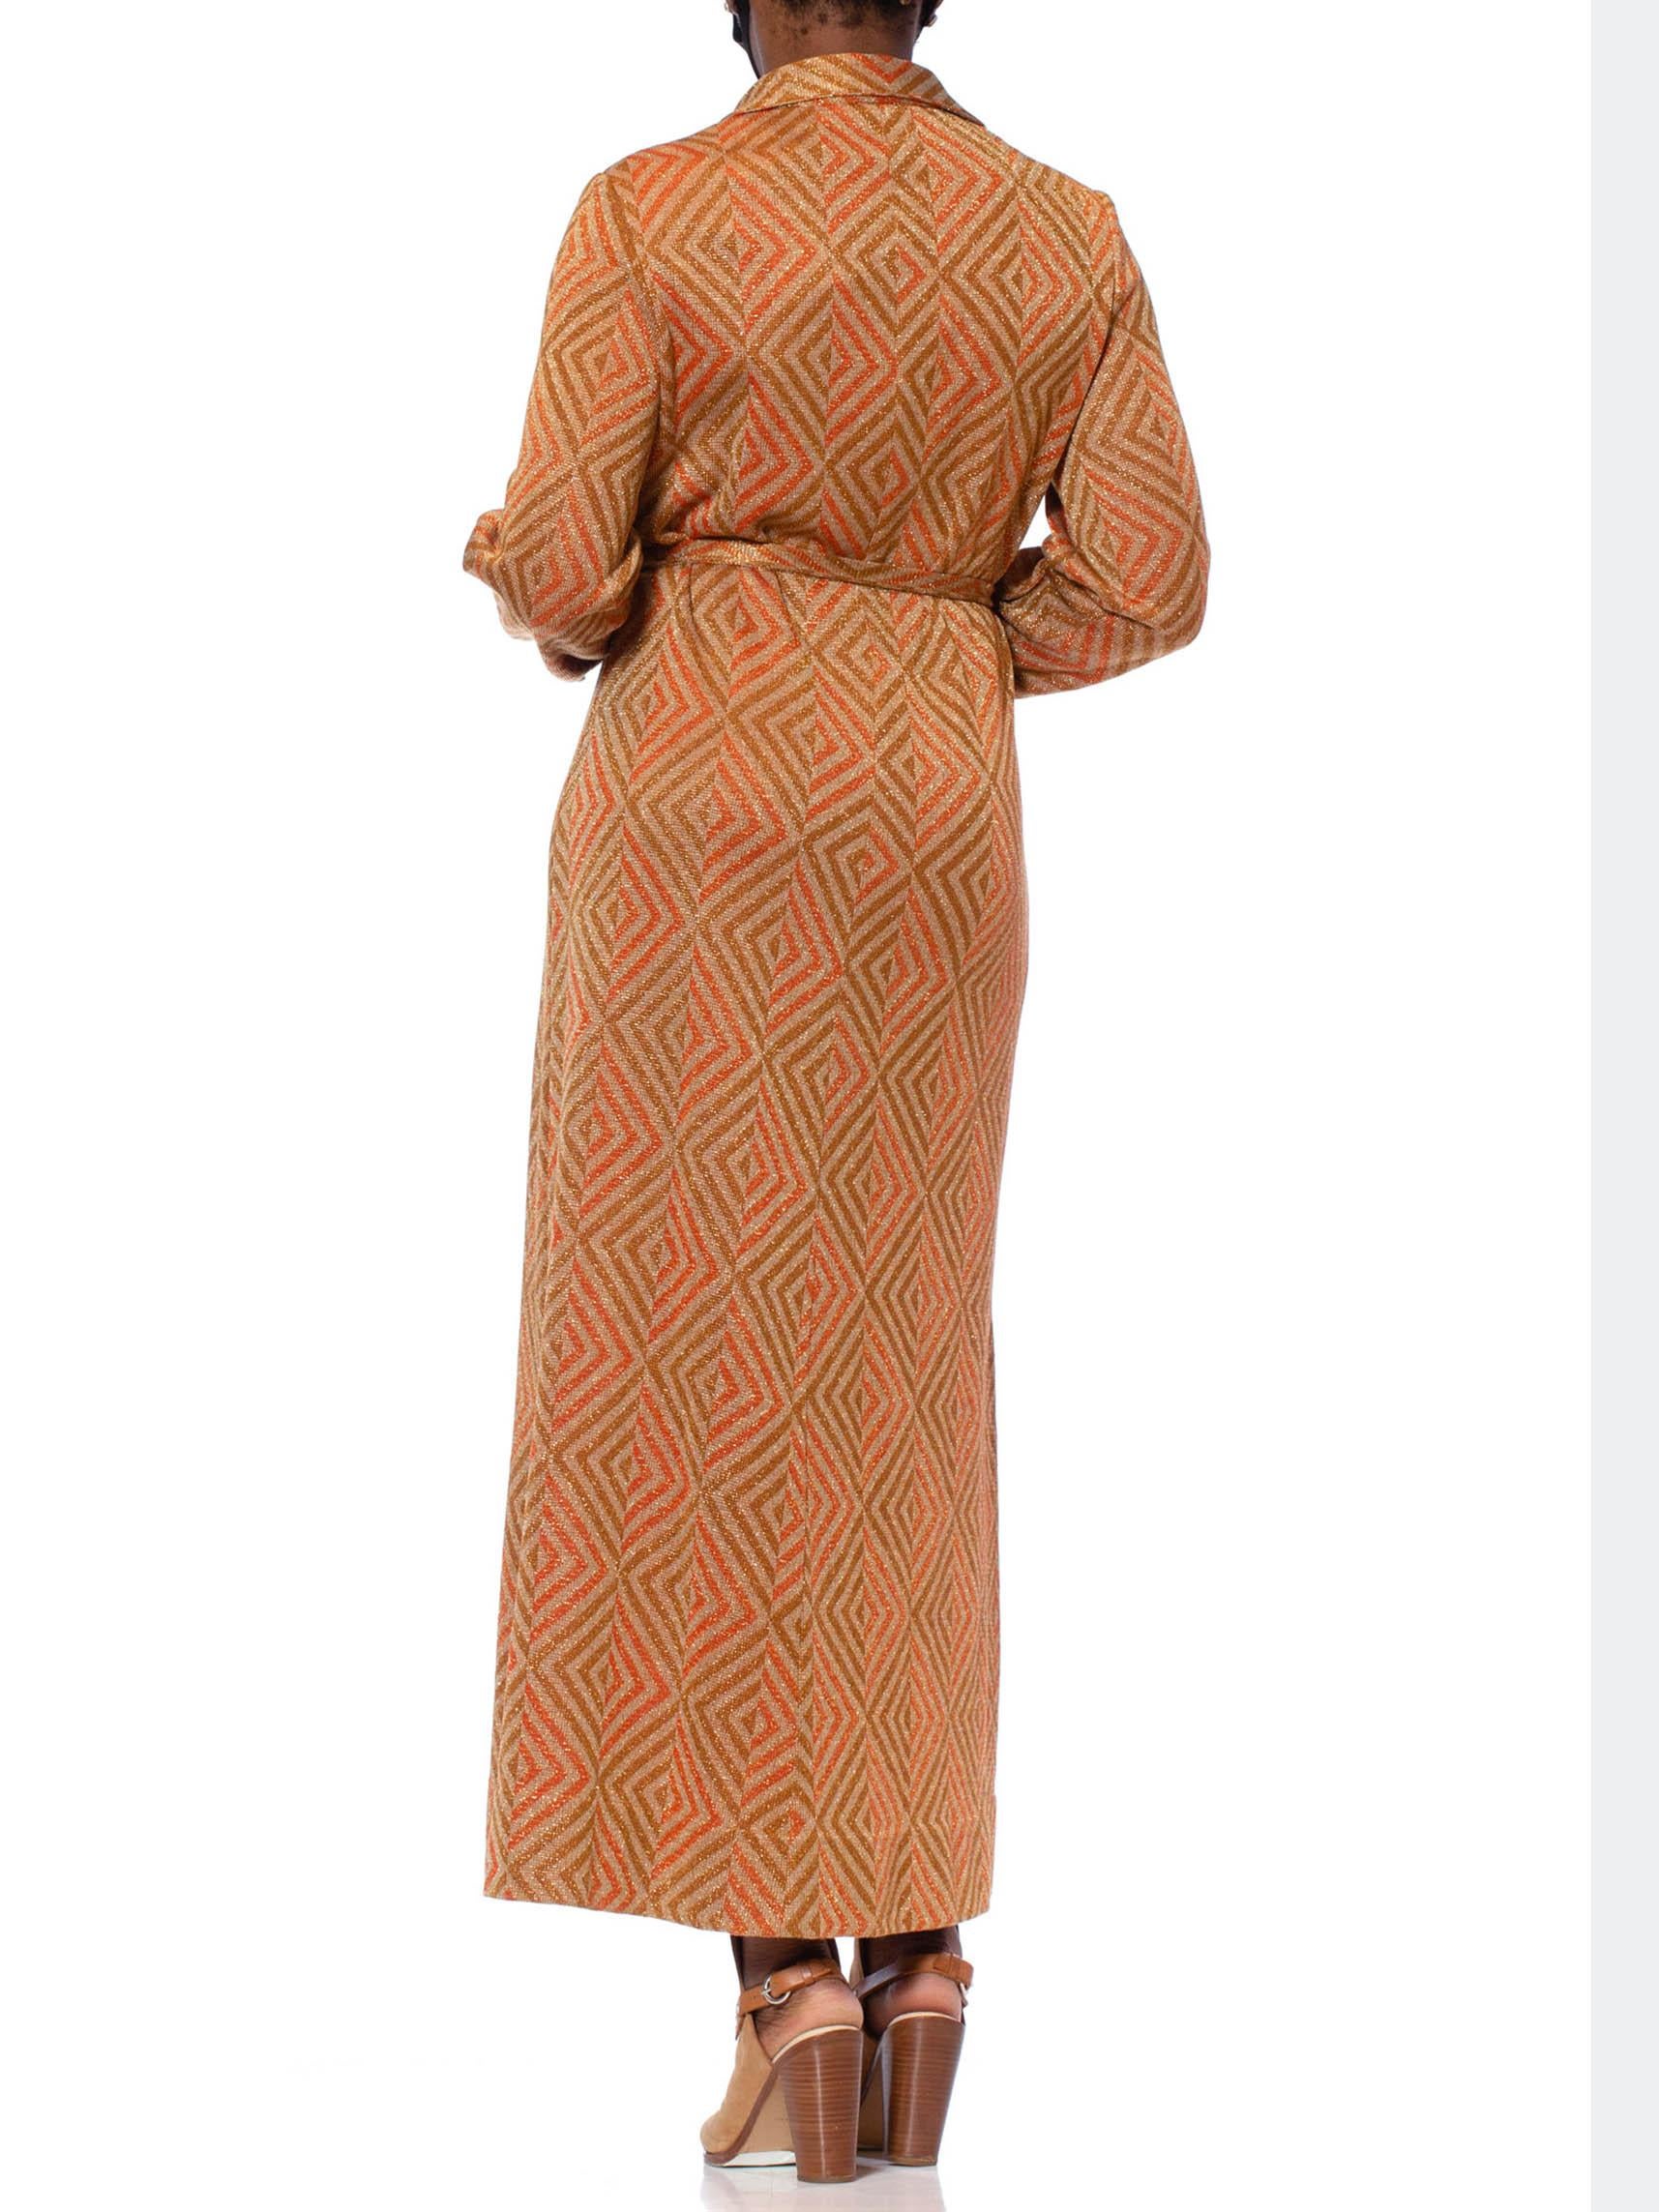 1970S Cinnamon Brown & Orange Poly/Lurex Double Knit Long Sleeved Maxi Cocktail 4